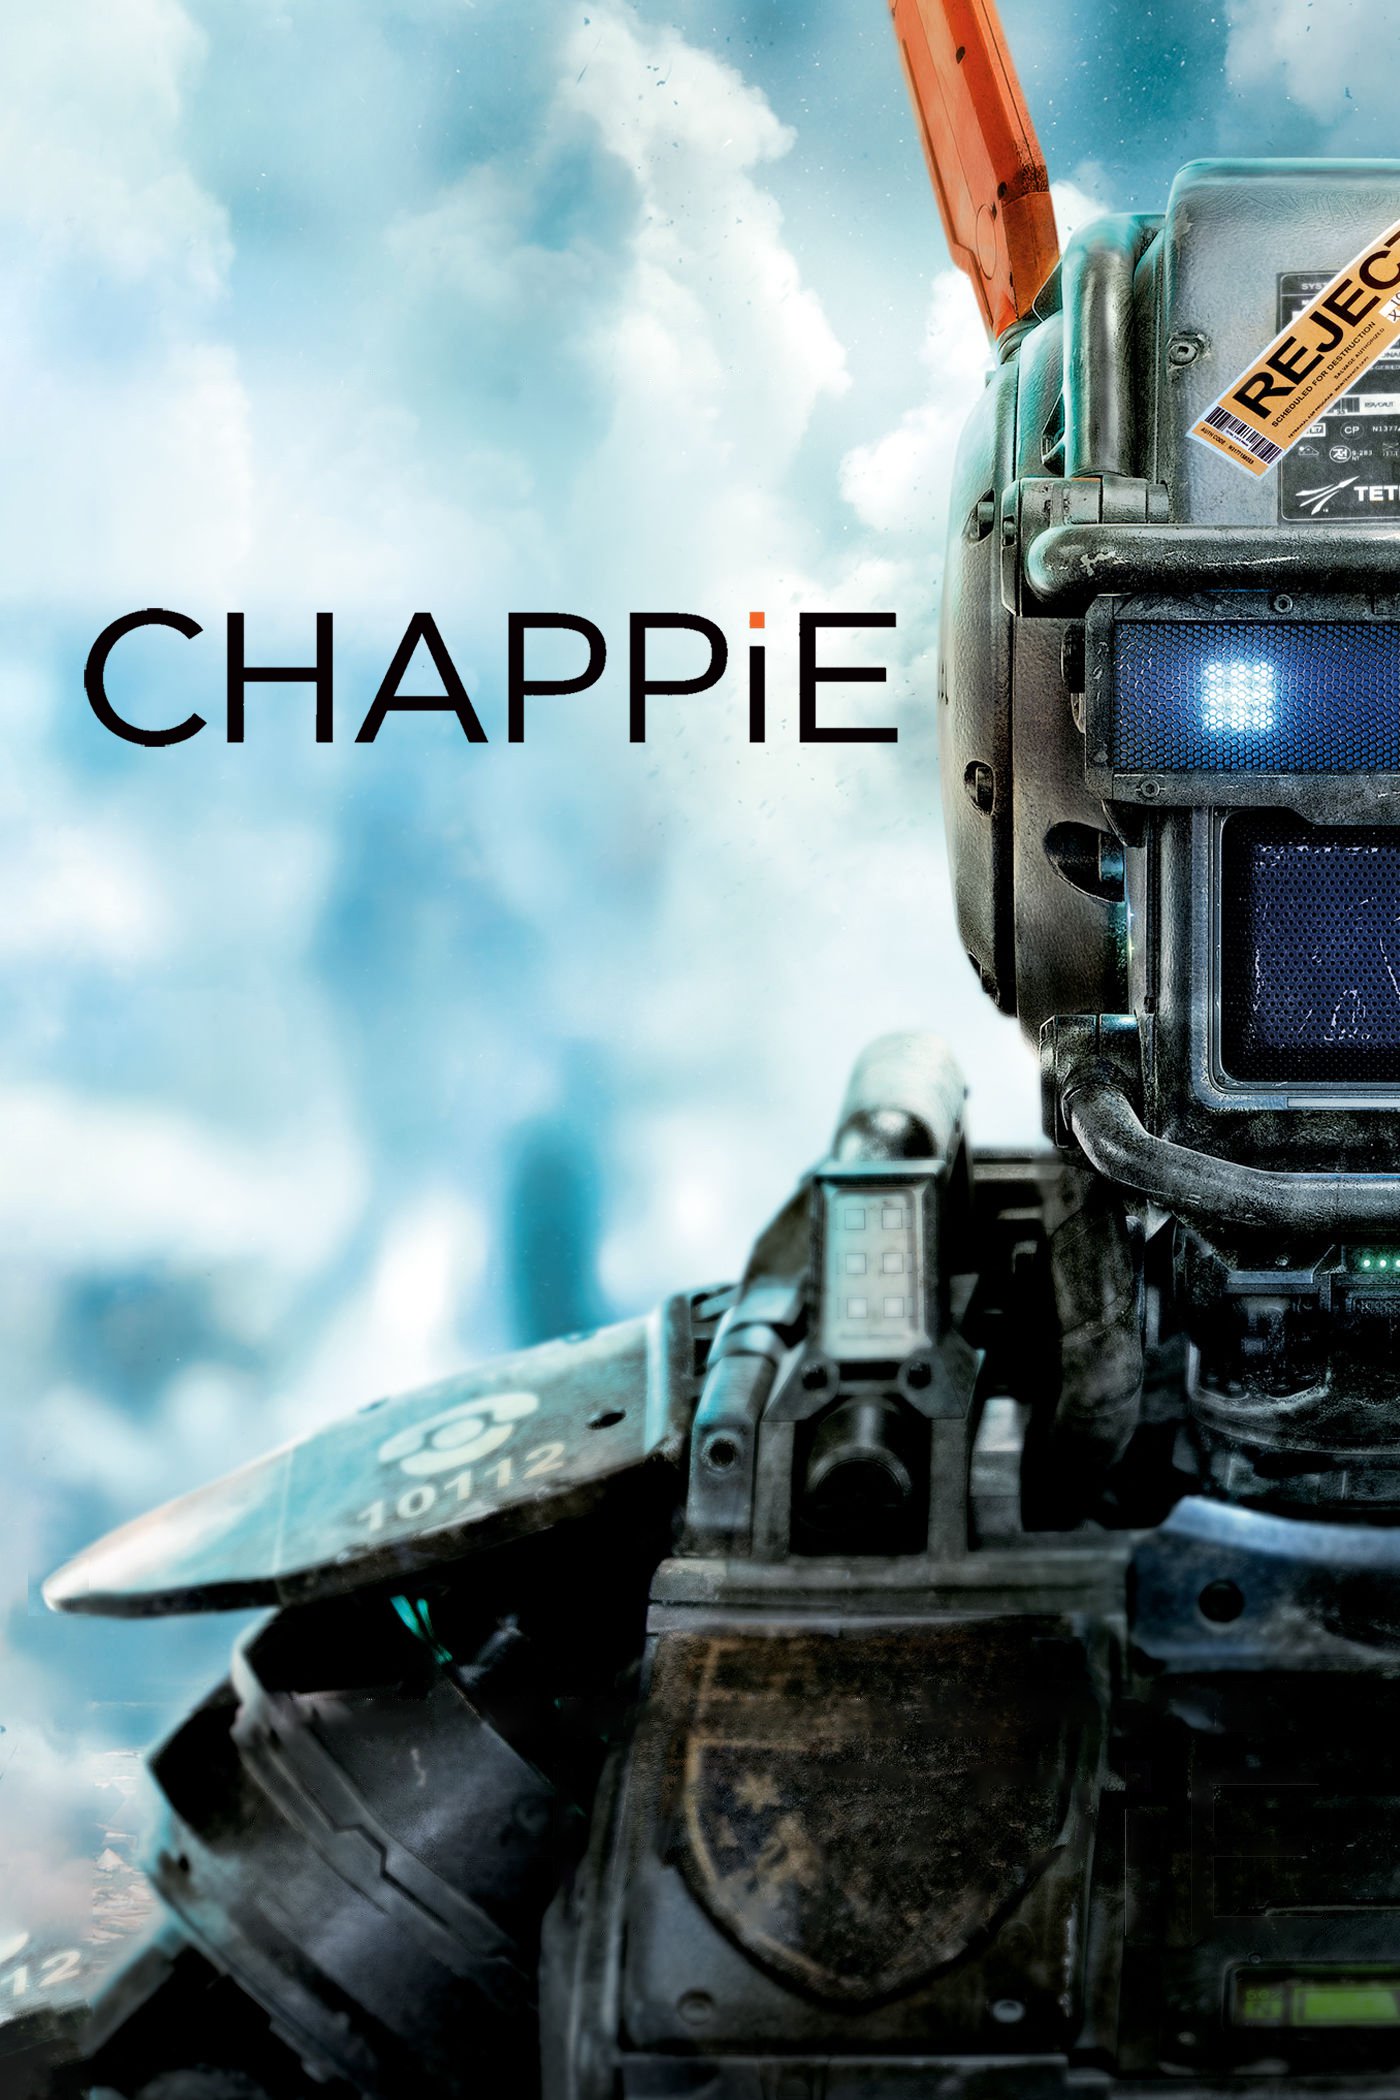 Chappie Wallpapers High Quality Download Free HD Wallpapers Download Free Images Wallpaper [wallpaper981.blogspot.com]